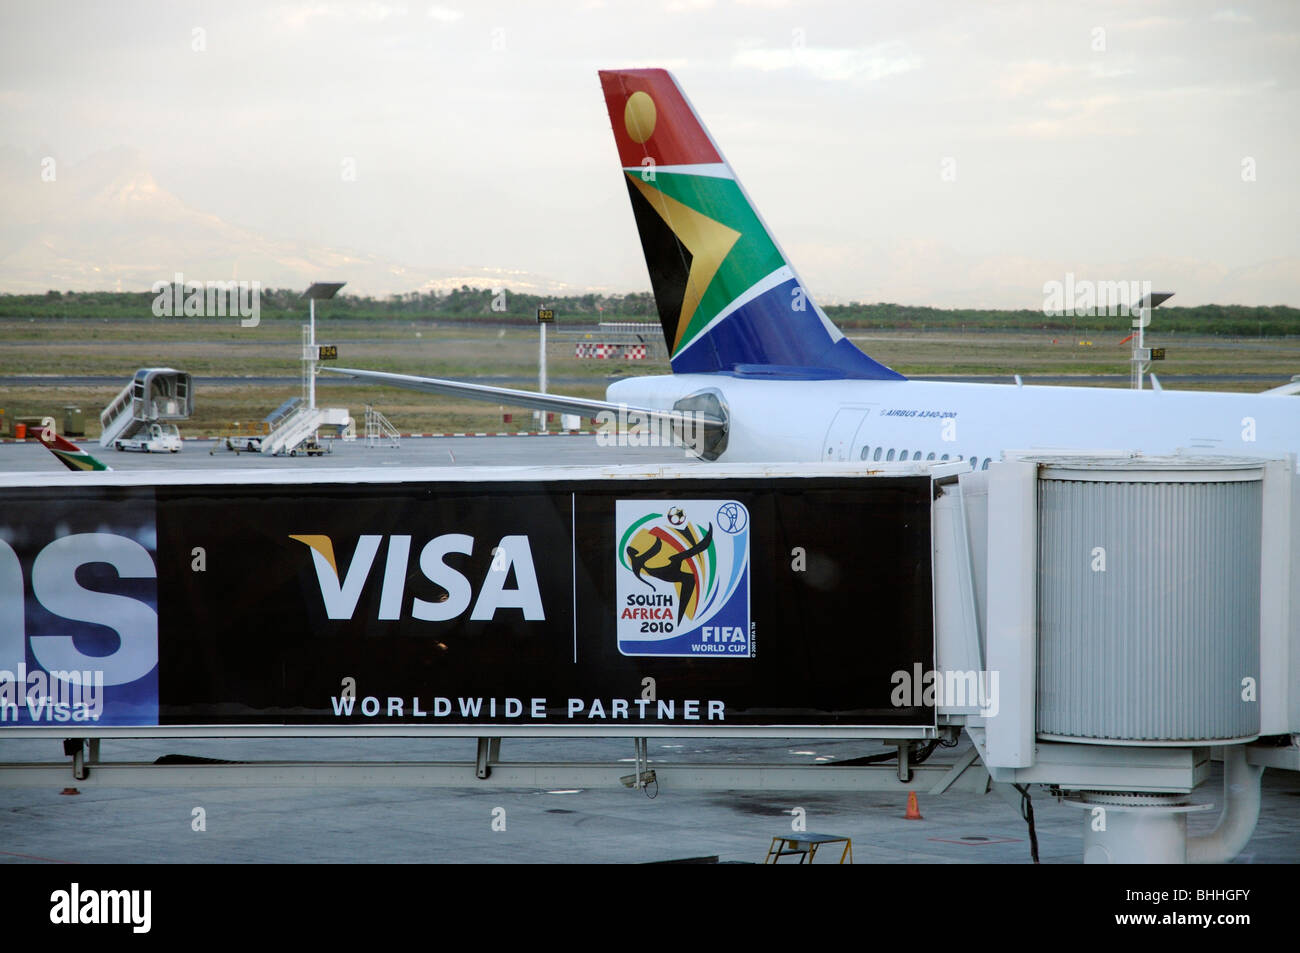 FIFA World Cup sponsor Anzeige bei Cape Town Airport South Africa A South African Airways Airbus im Hintergrund Stockfoto